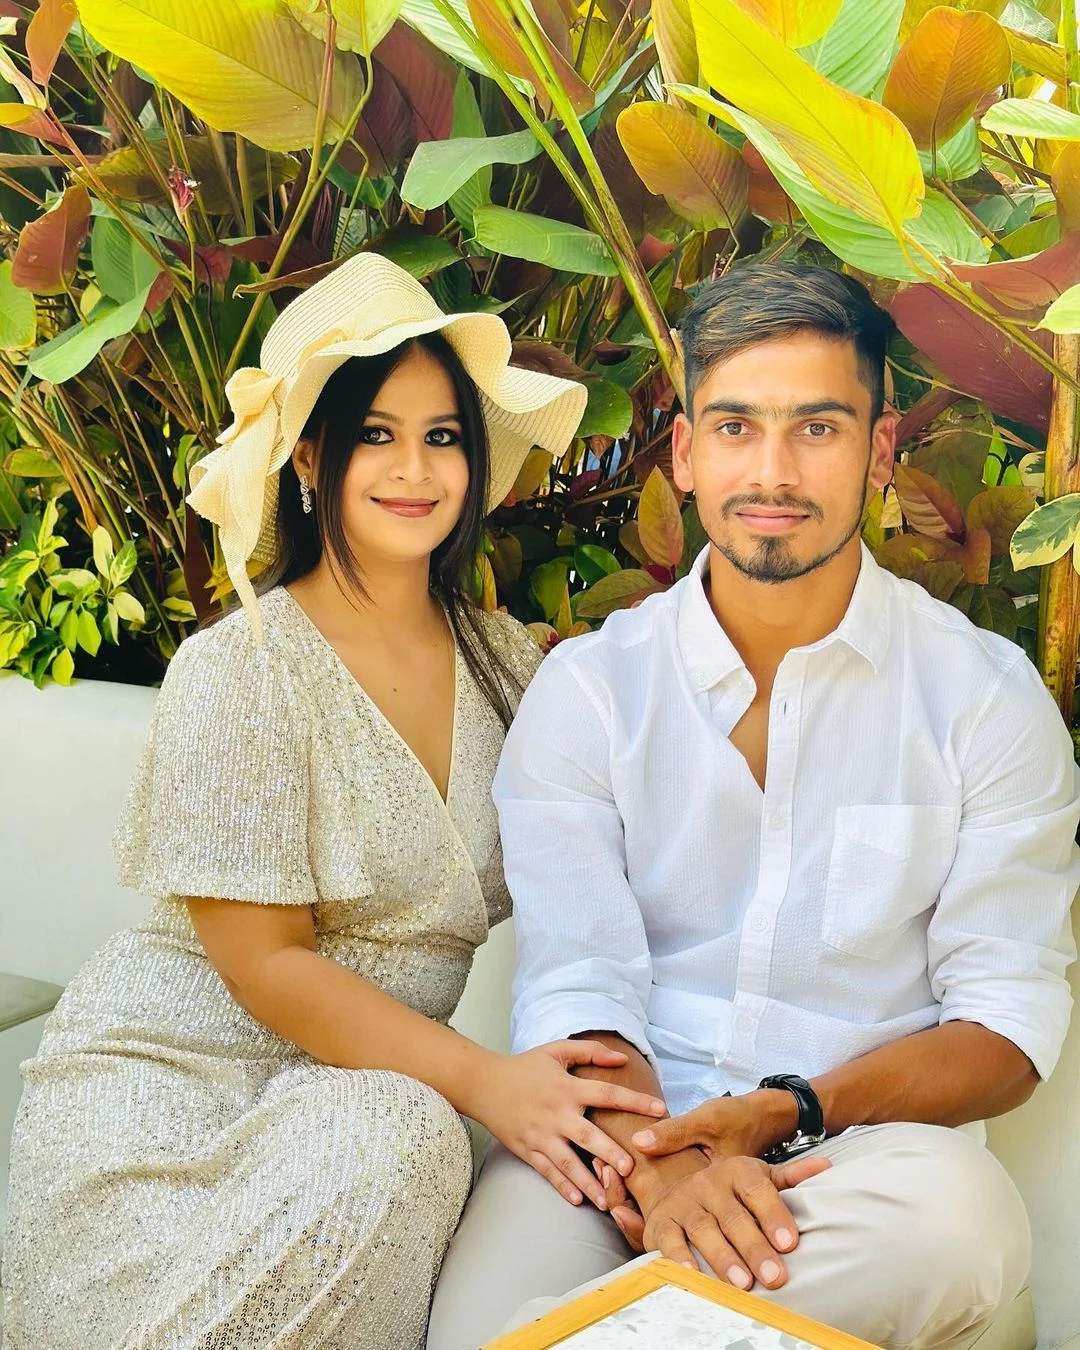 Praveen Dubey and his wife Moon Dubey